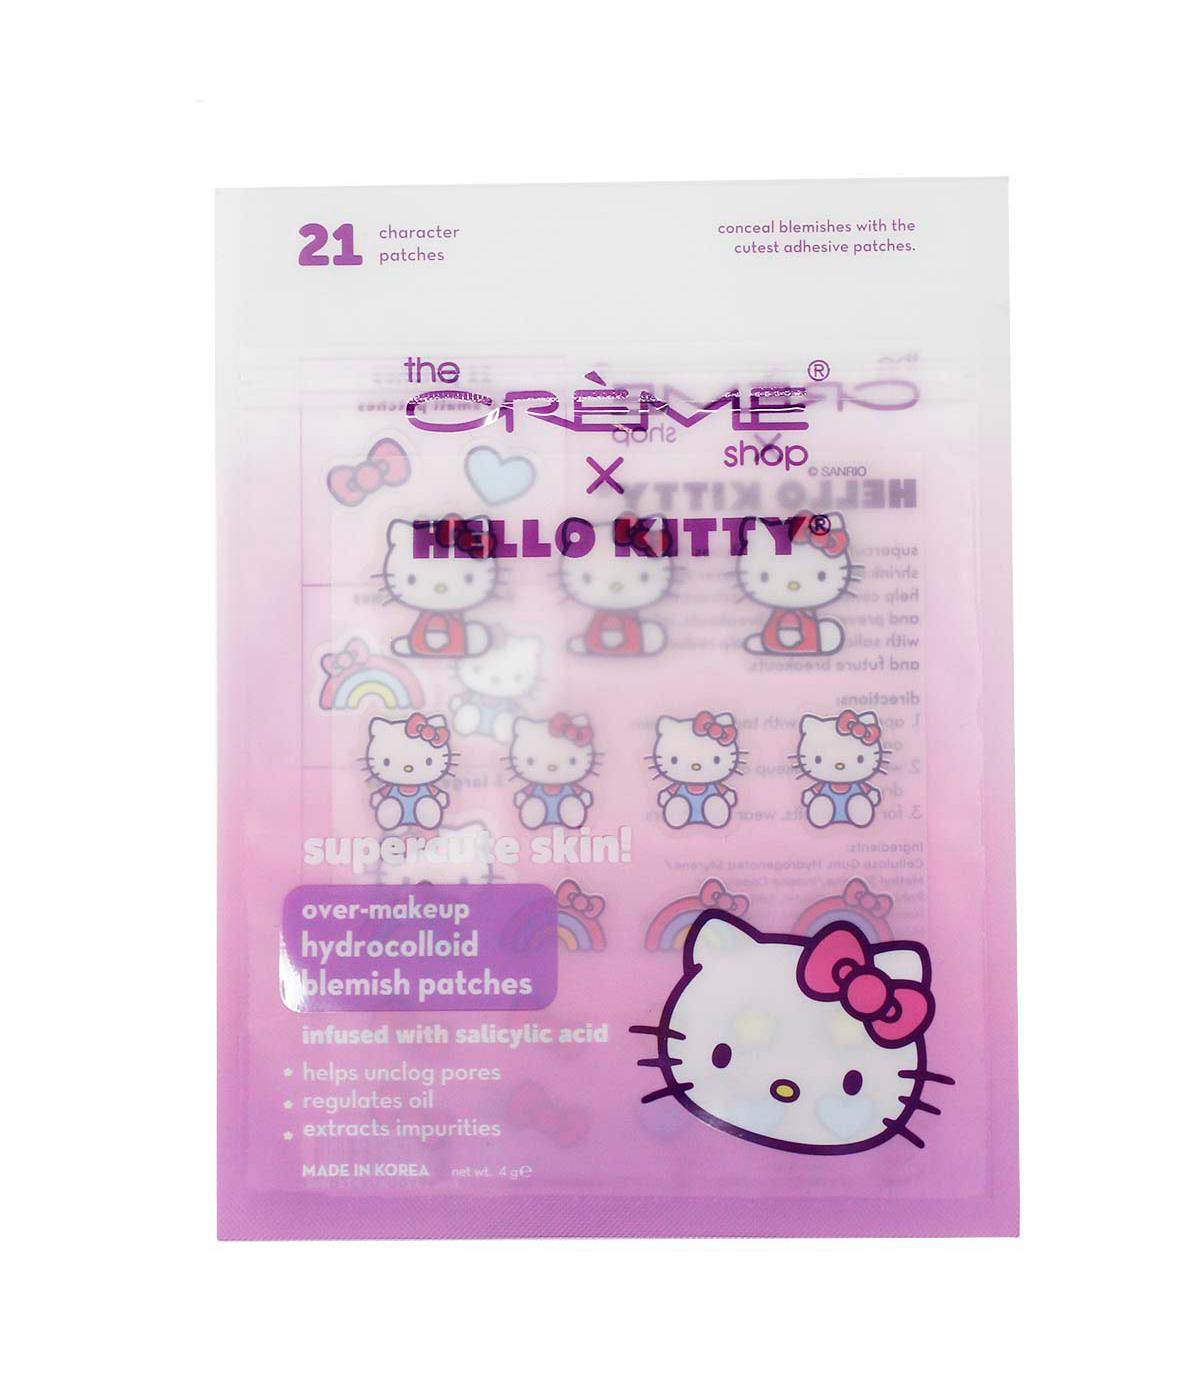 The Crème Shop X Hello Kitty Supercute Skin! Patches; image 1 of 2